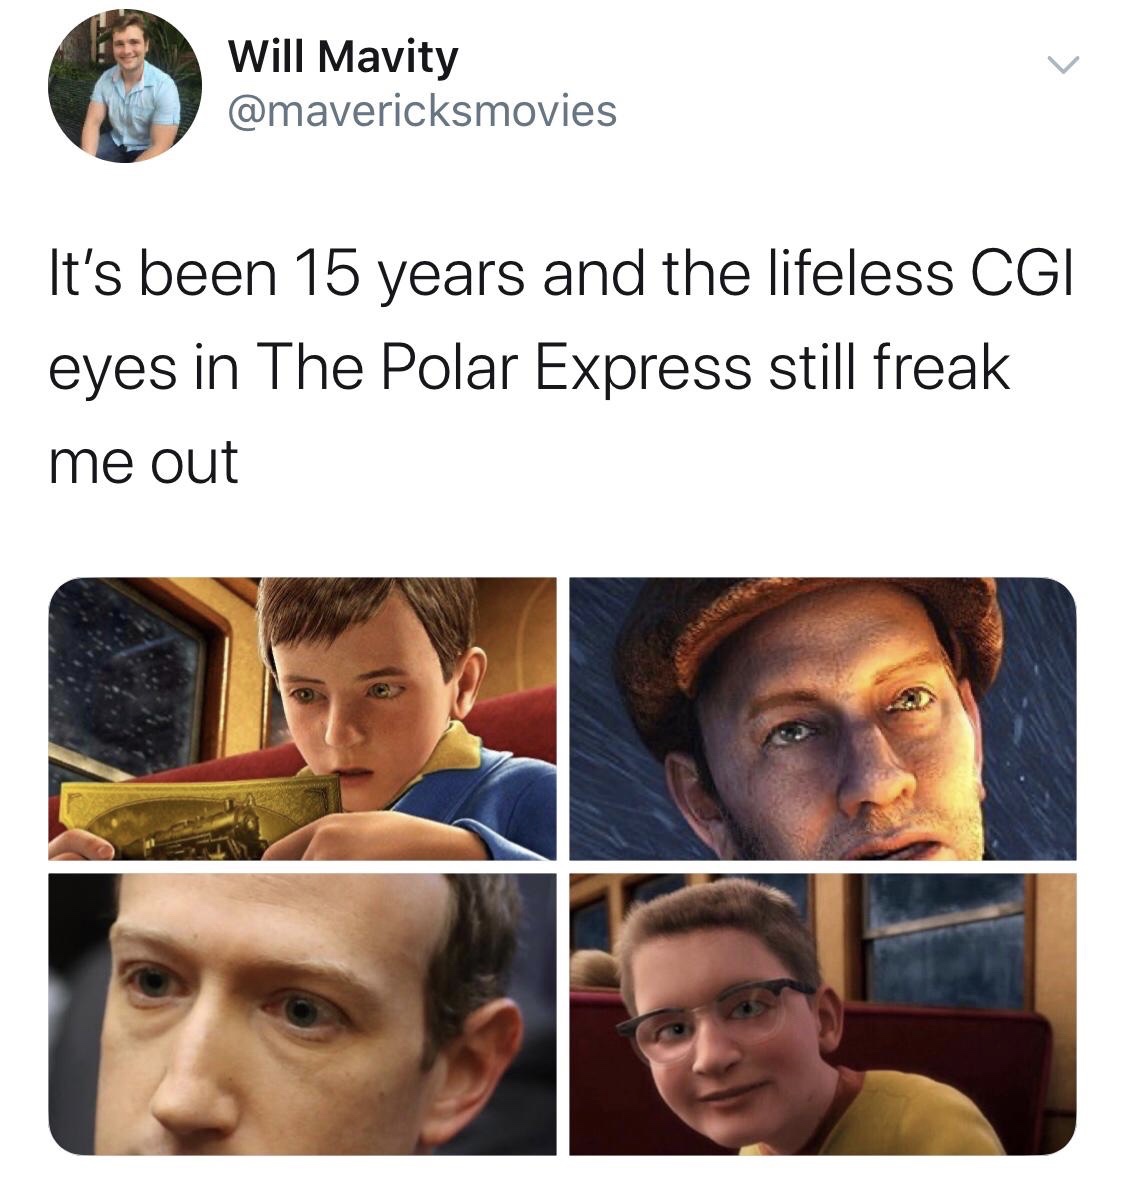 selfie - Will Mavity wim Marit movie It's been 15 years and the lifeless Cgi eyes in The Polar Express still freak me out